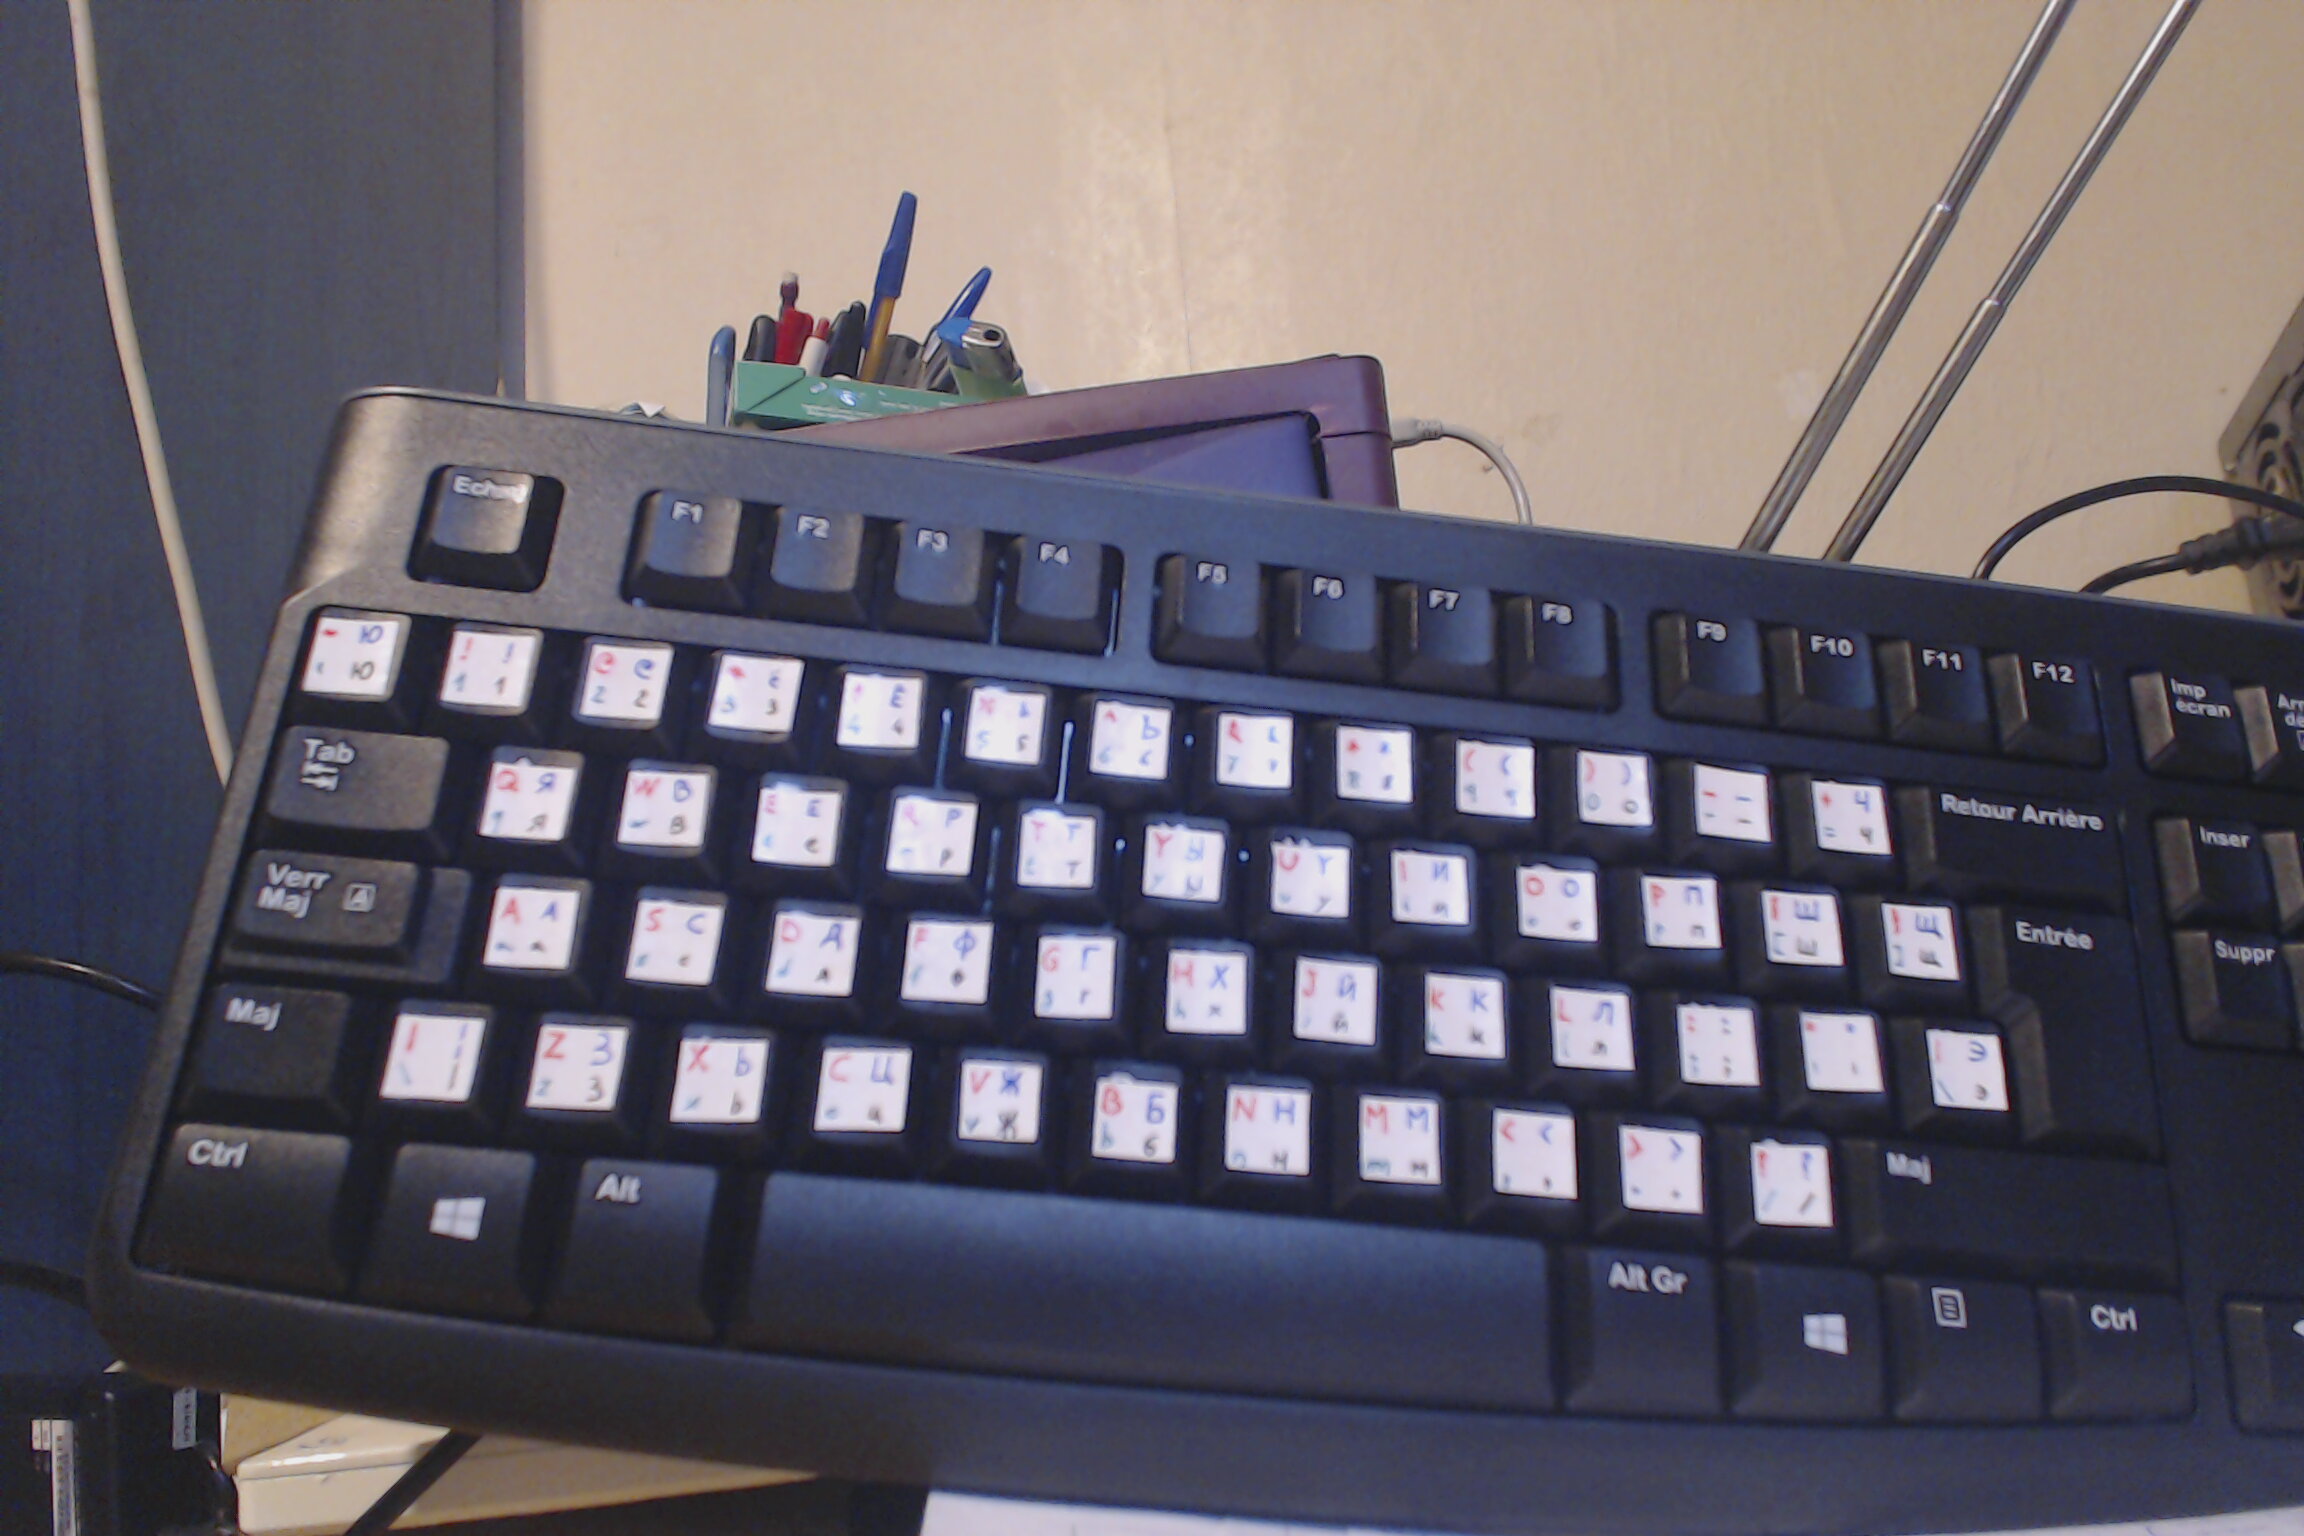 My hand-made Russian (phonetic) keyboards, image 7 of 14